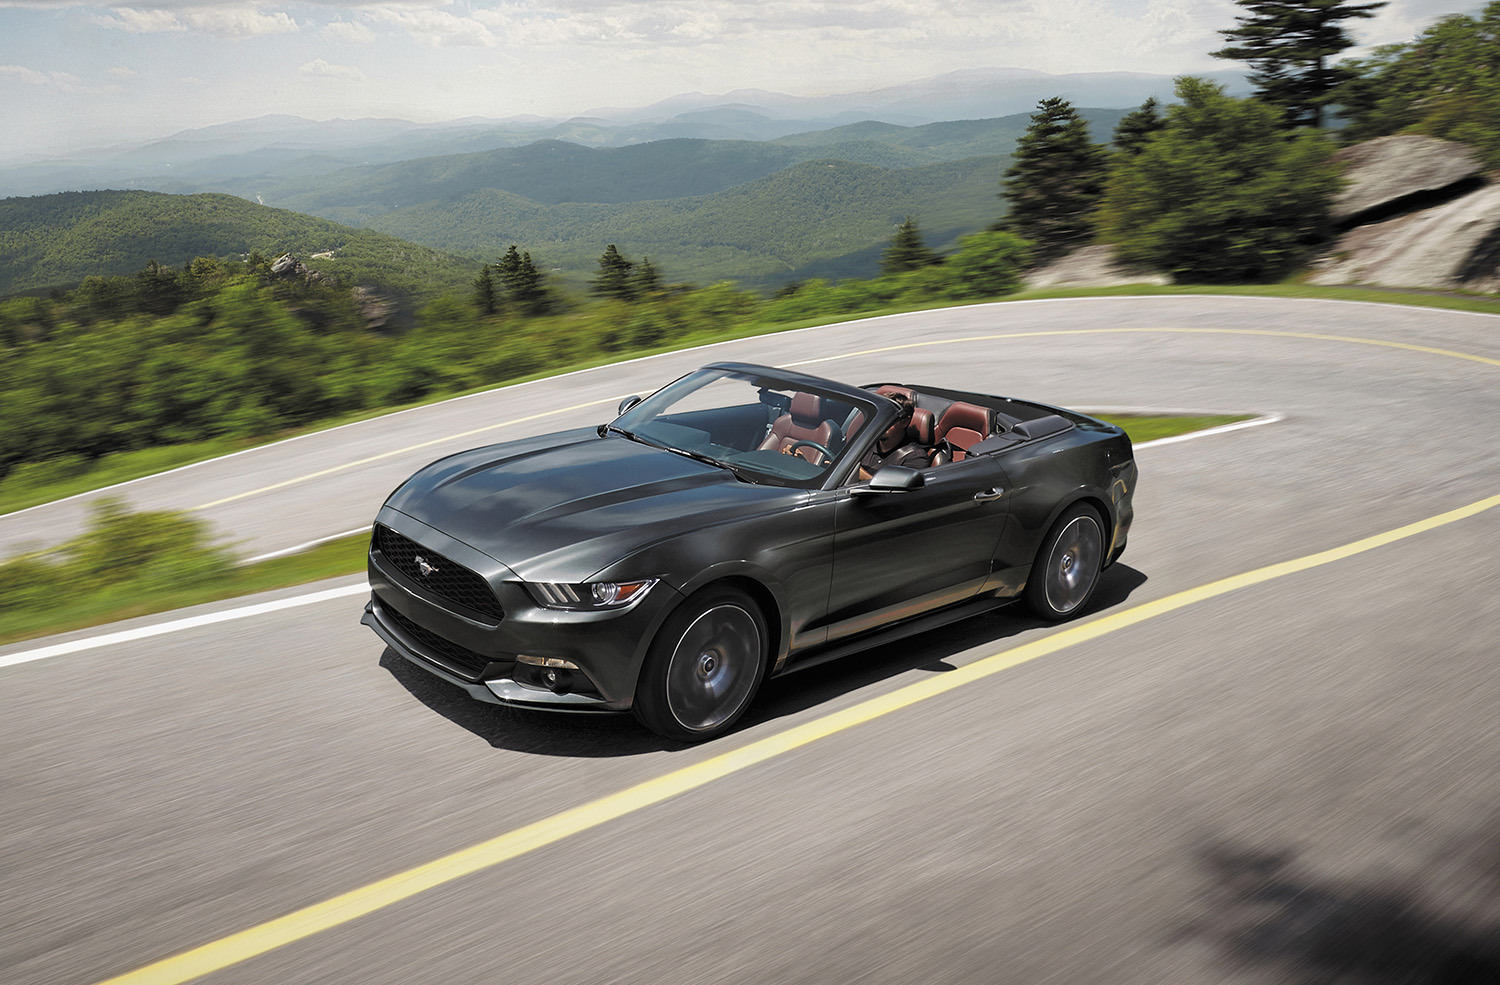 2017 Ford Mustang GT Convertible driving on mountain road